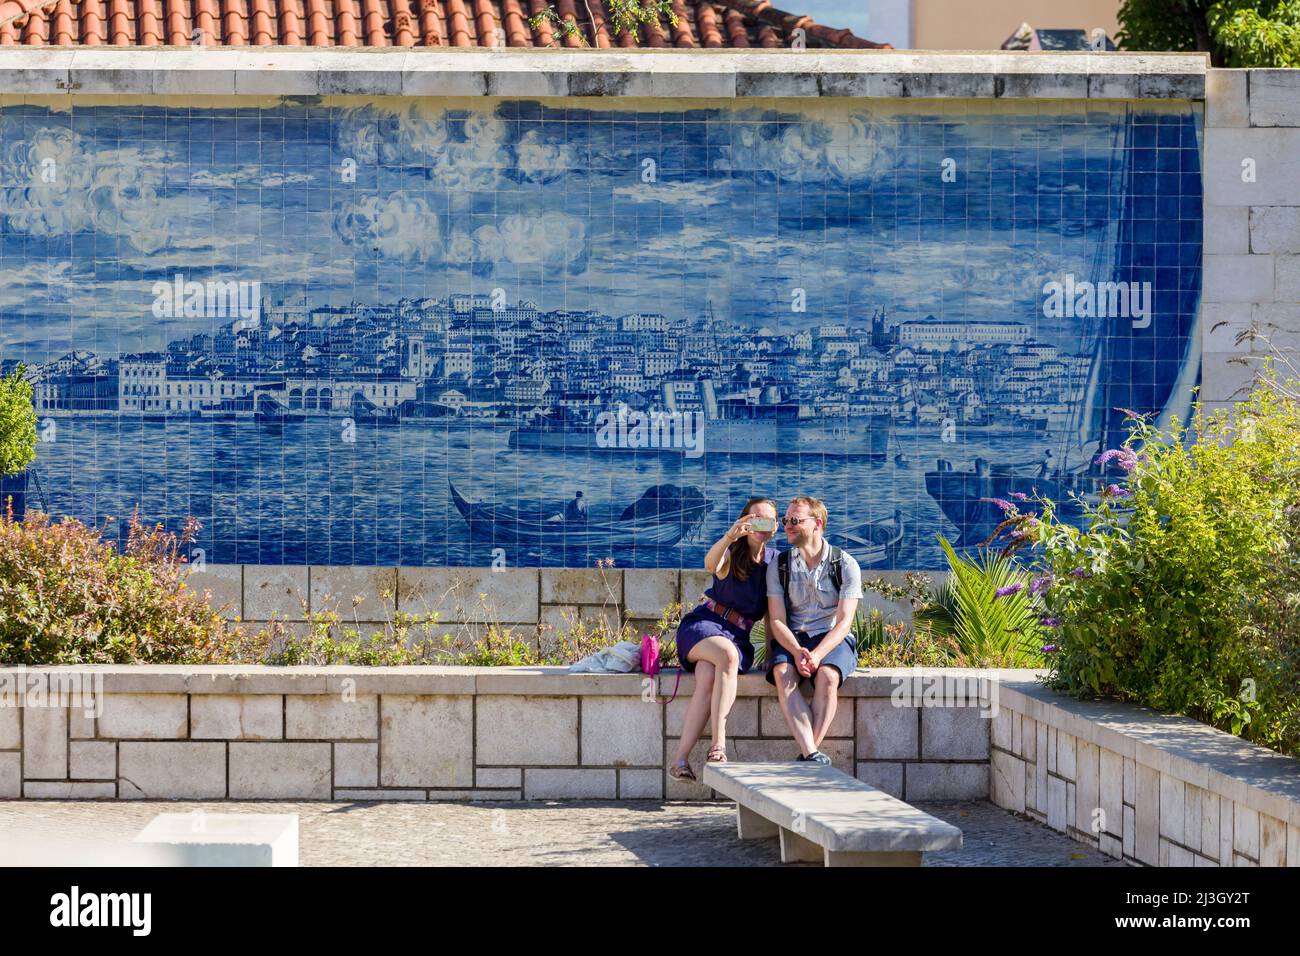 Portugal, Lisbon, Alfama district, Miradouro de Santa Luzia, young couple in front of azulejos showing a view of the city on the banks of the Tagus (early 20th century) Stock Photo